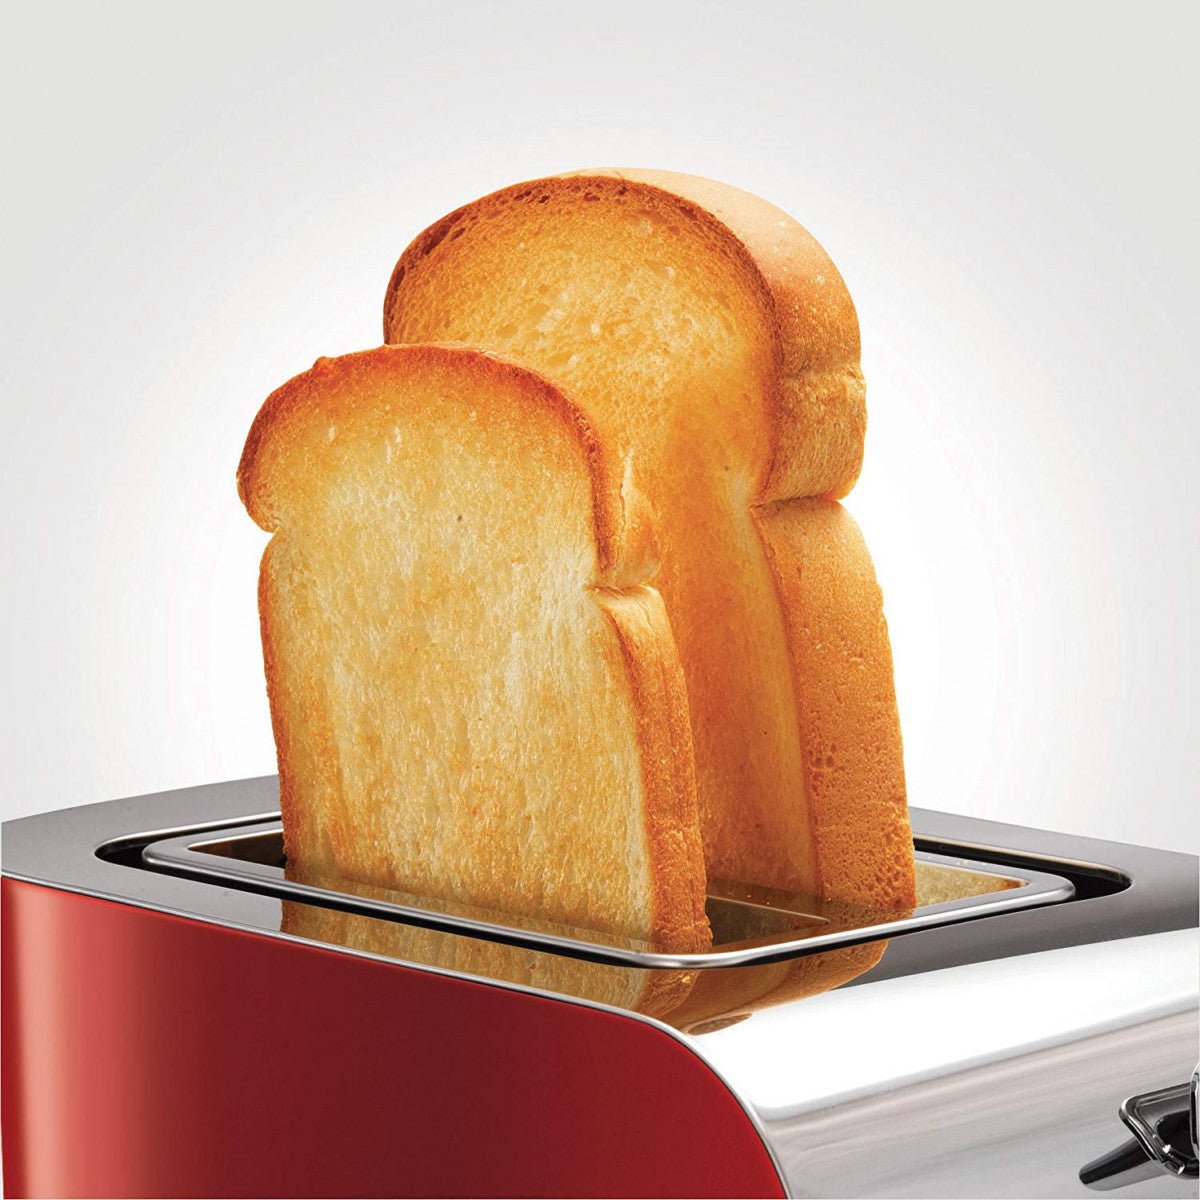 Morphy Richards 222056 Equip 2 Slice Toaster 850W Red/Silver